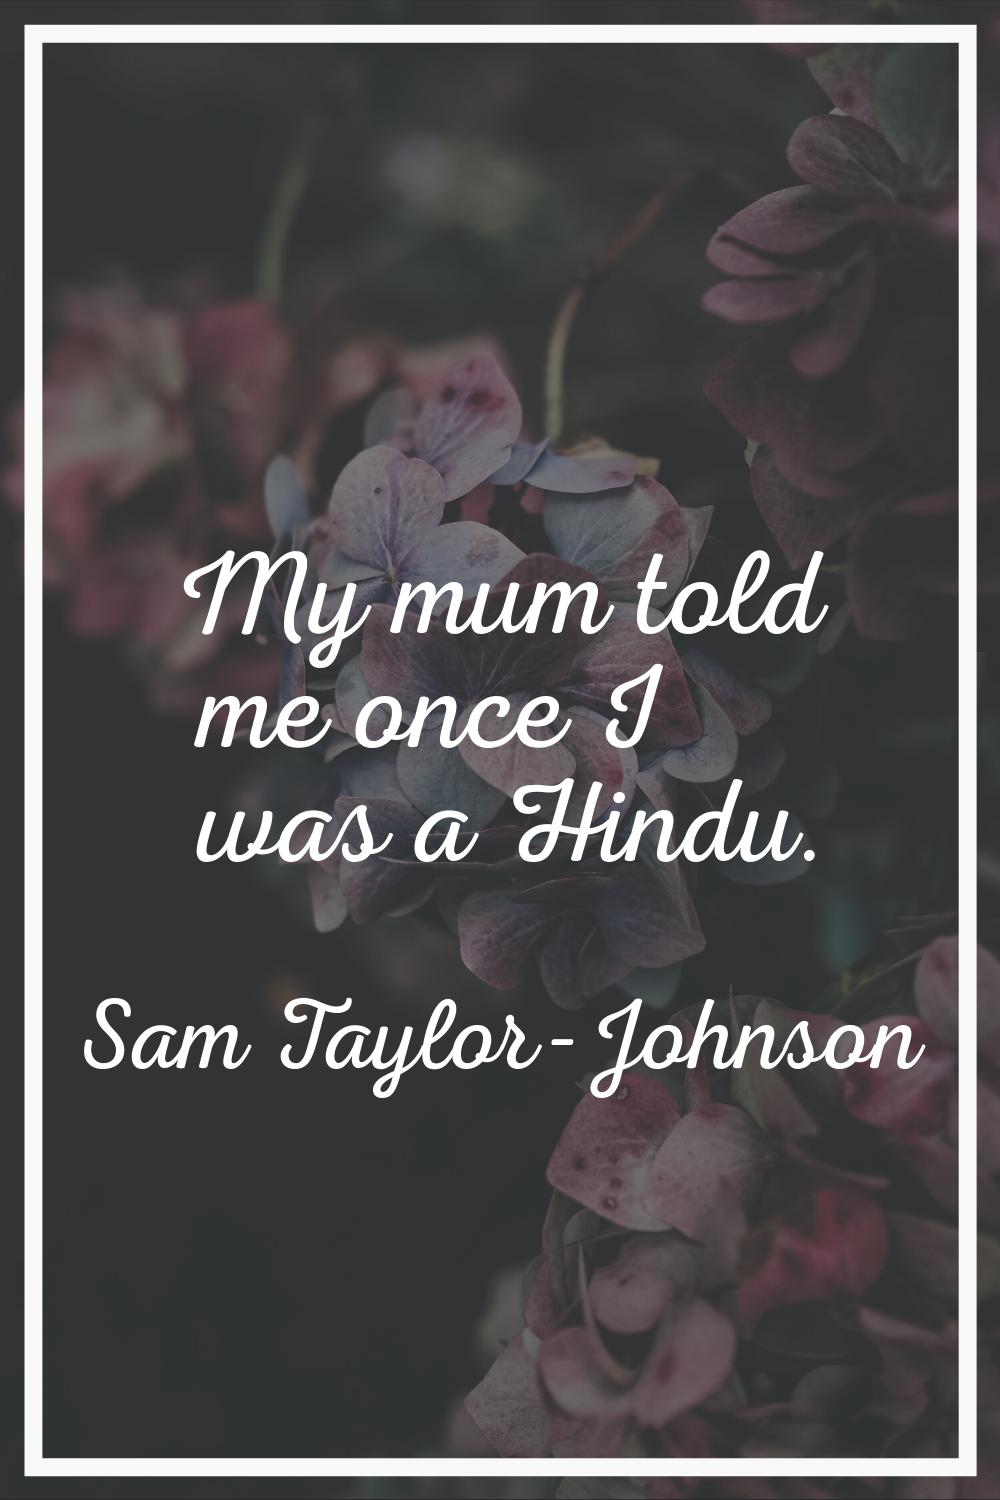 My mum told me once I was a Hindu.